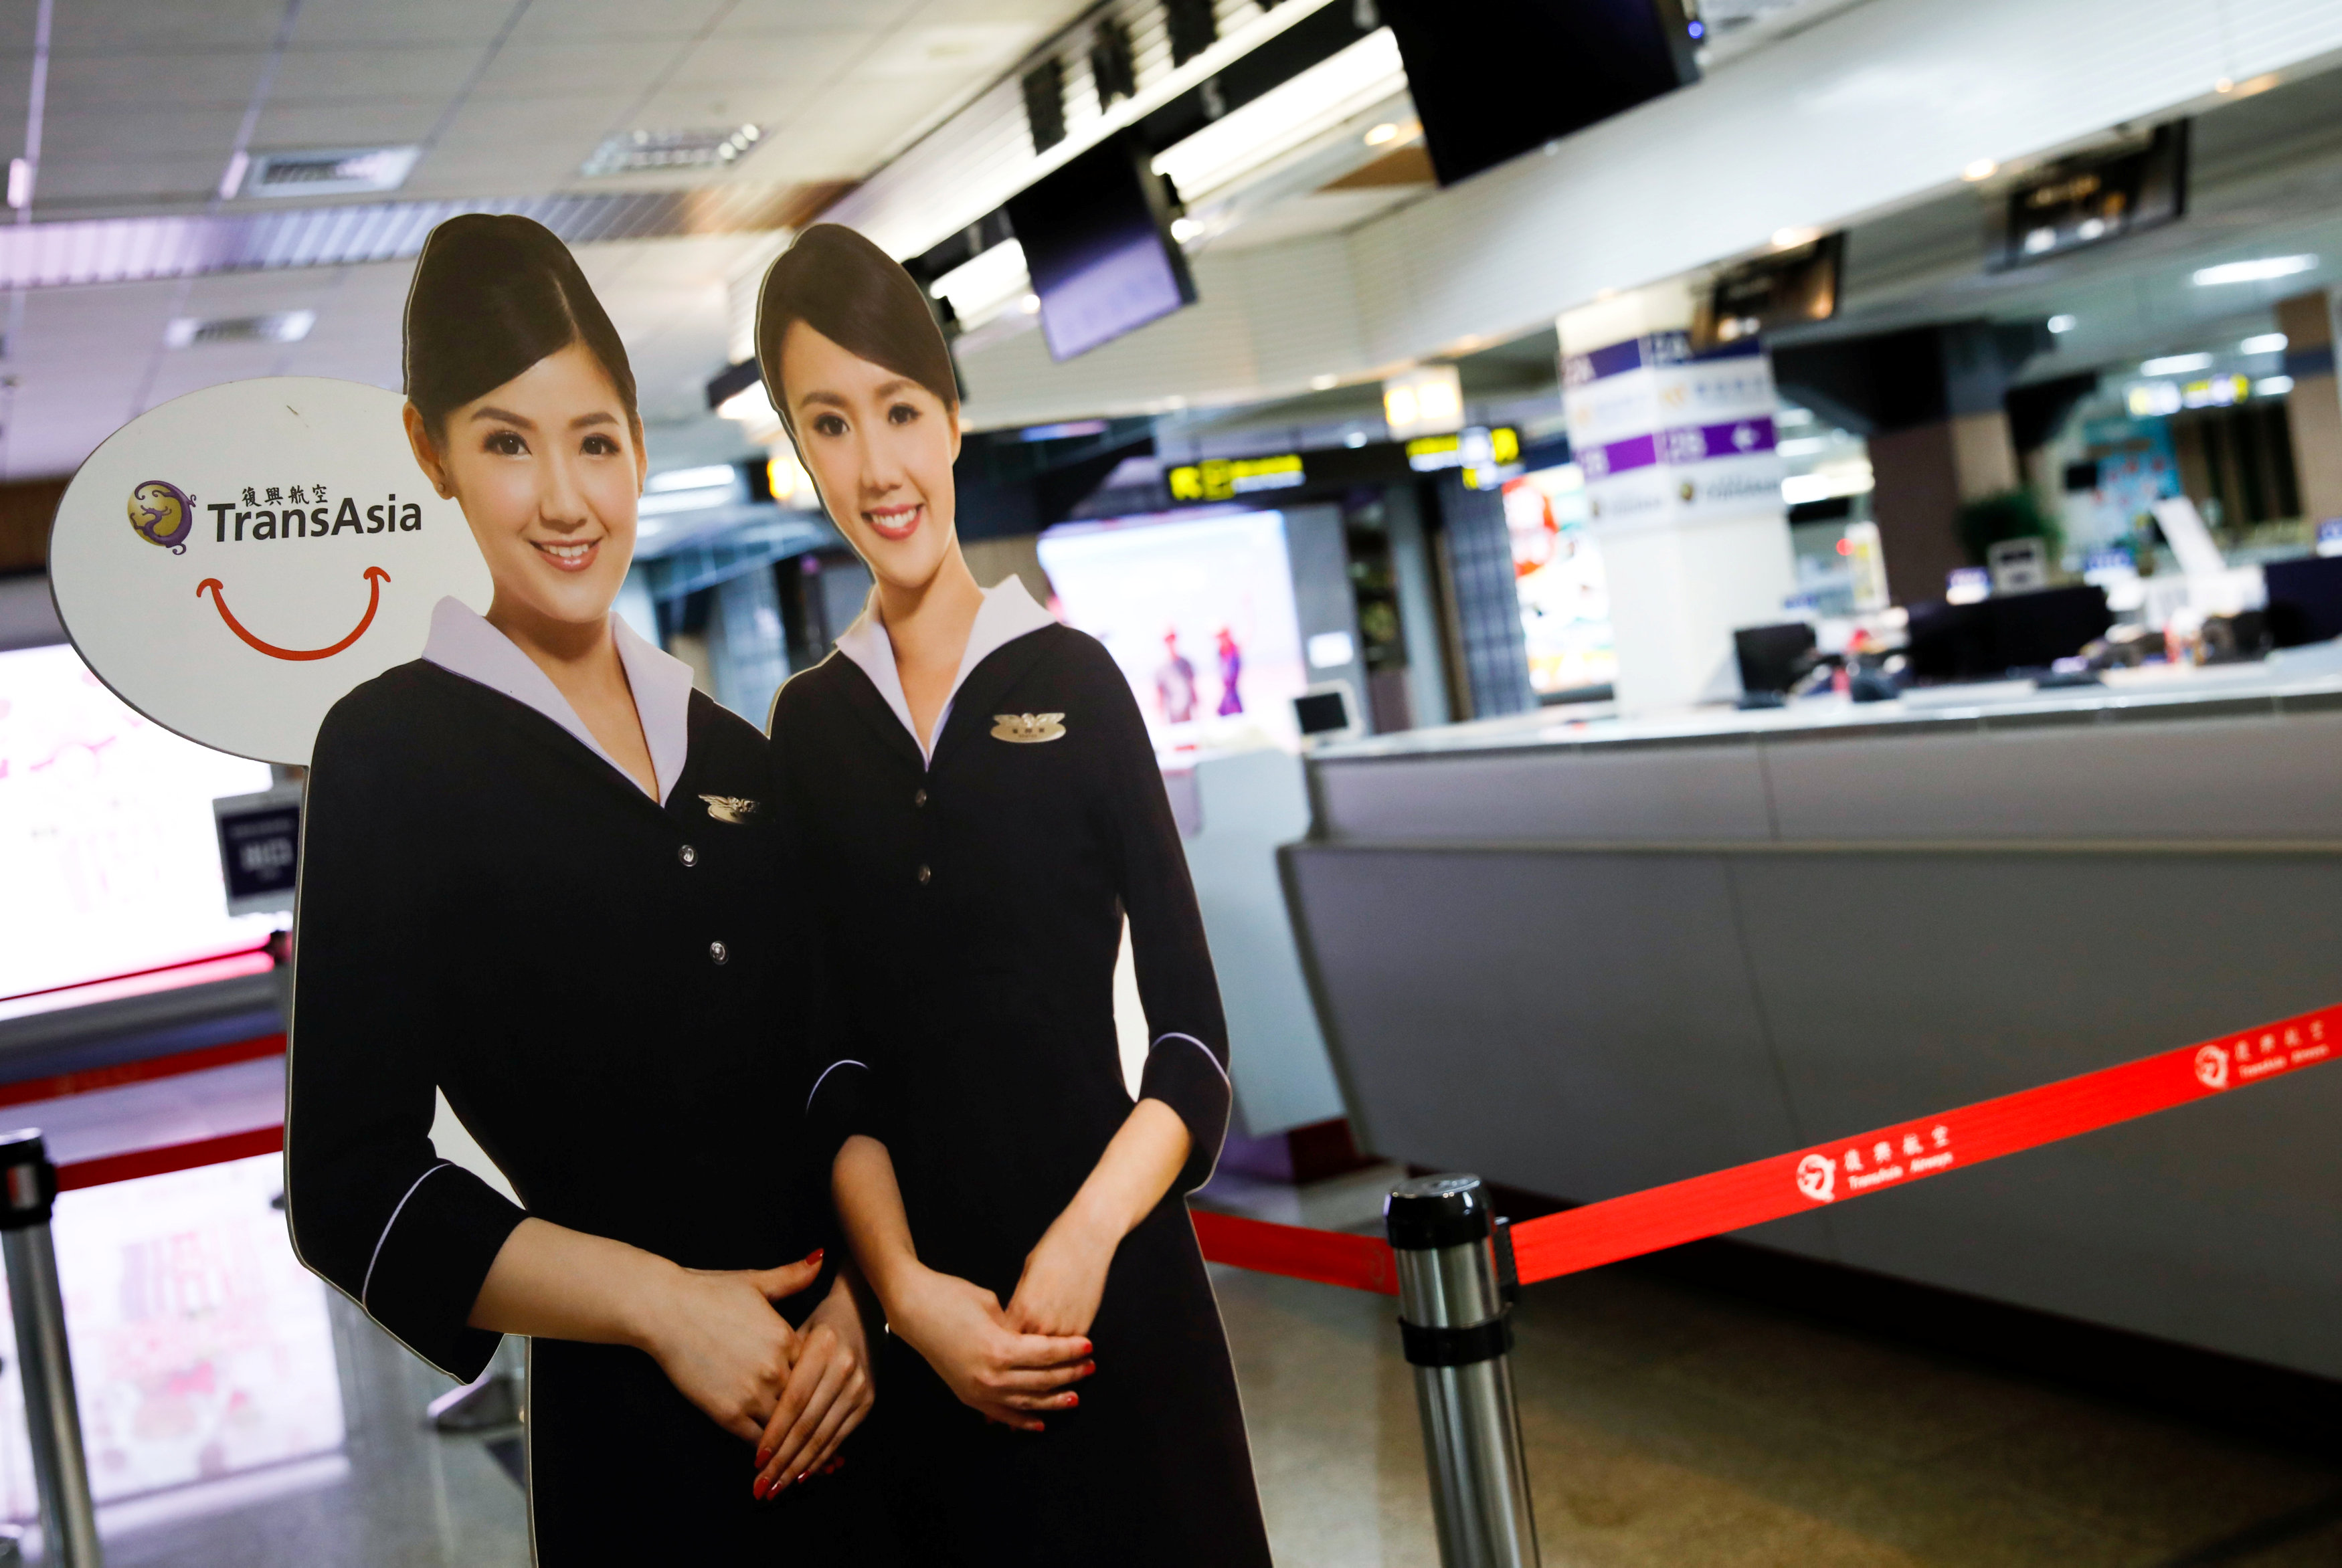 A paper cutout depicting flight attendants of Taiwan's third-largest airline, TransAsia Airways Corp. is seen in front of its counter after the company applied to suspend its flights without giving any earlier warning at Songshan Airport in Taipei, Taiwan